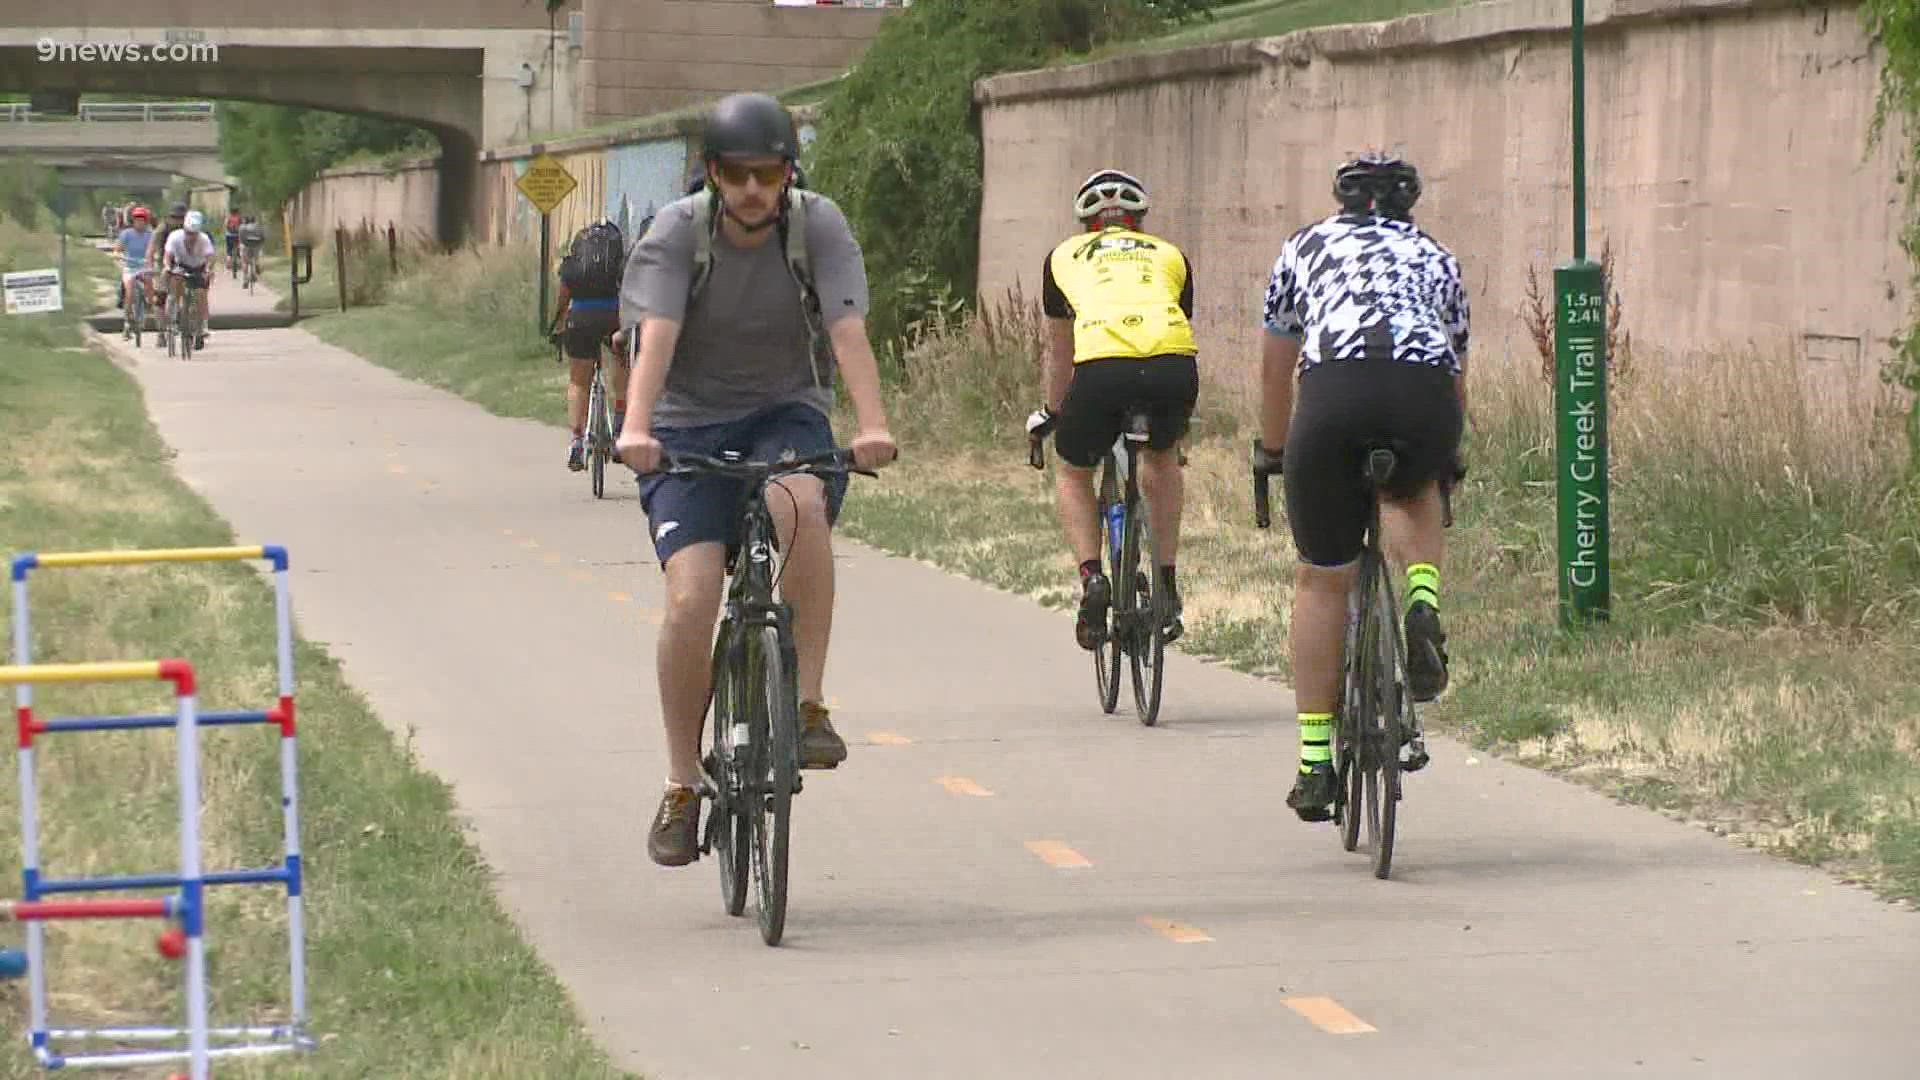 The theme for this year's event is "Get Back in the Saddle," with more than 100 stations around the Denver area.